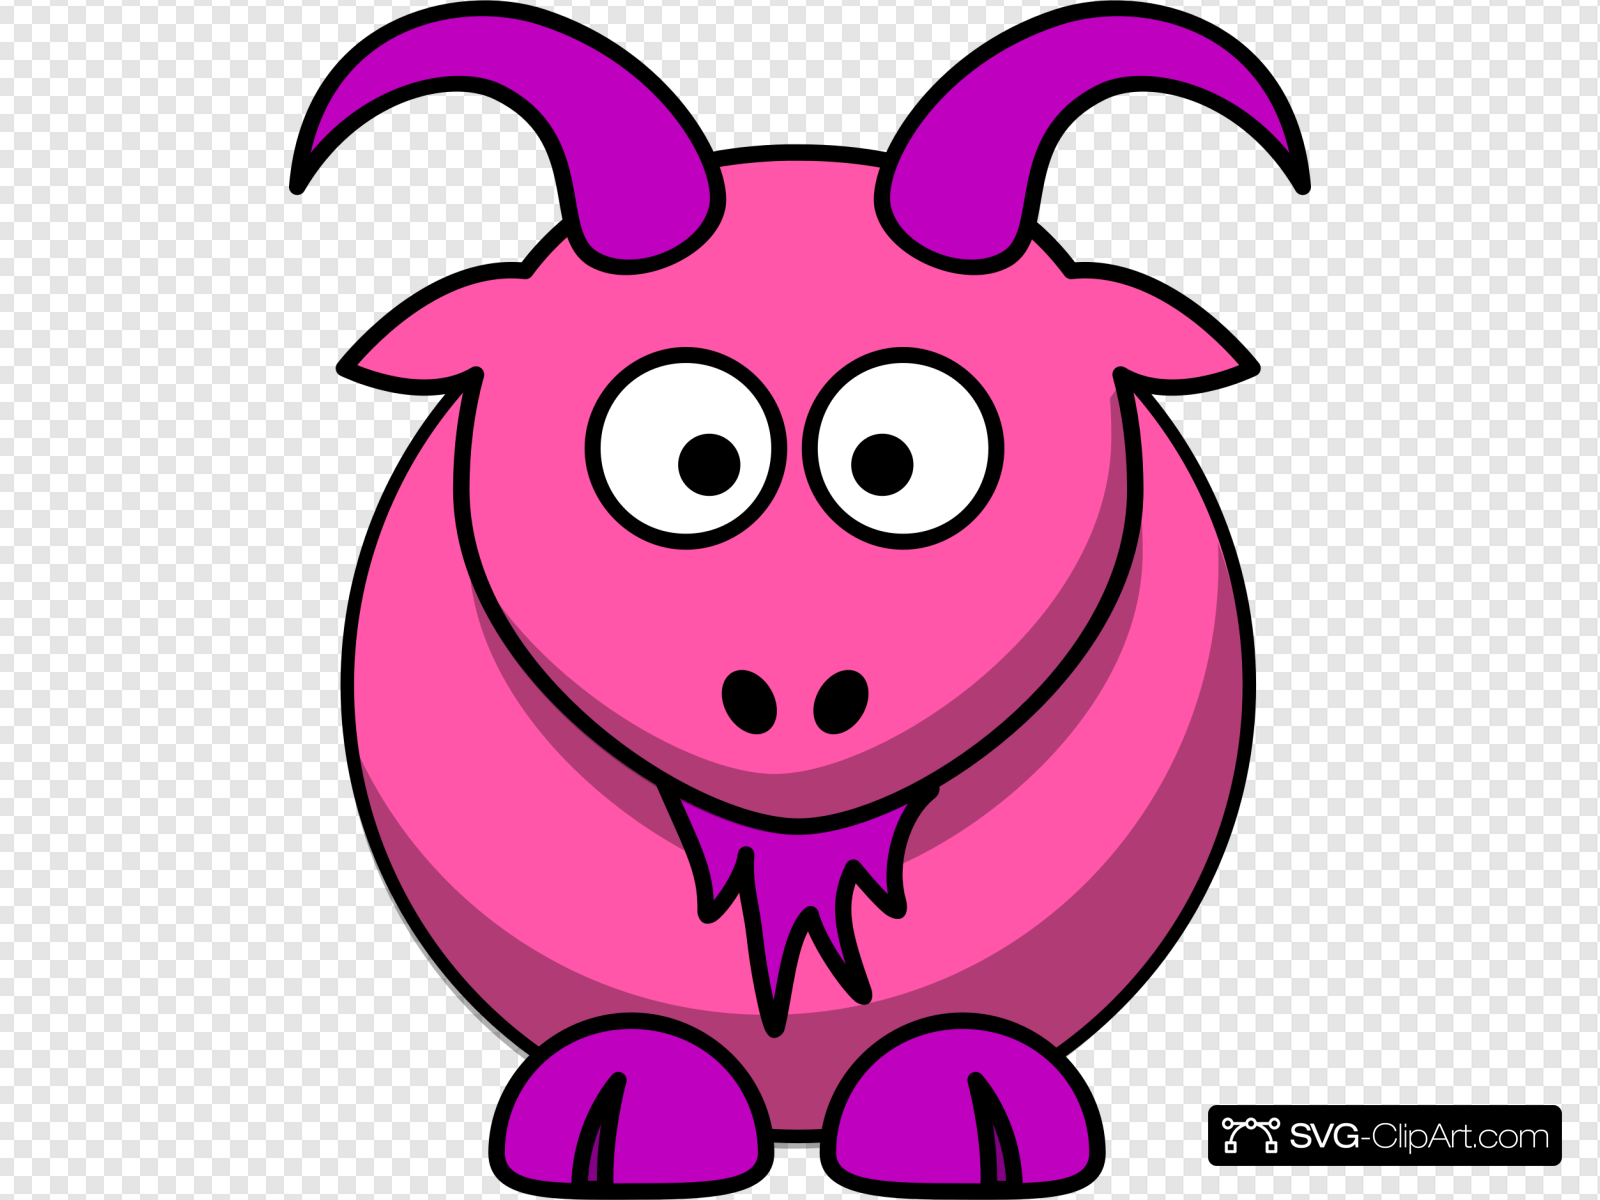 Clip art icon and. Clipart goat pink